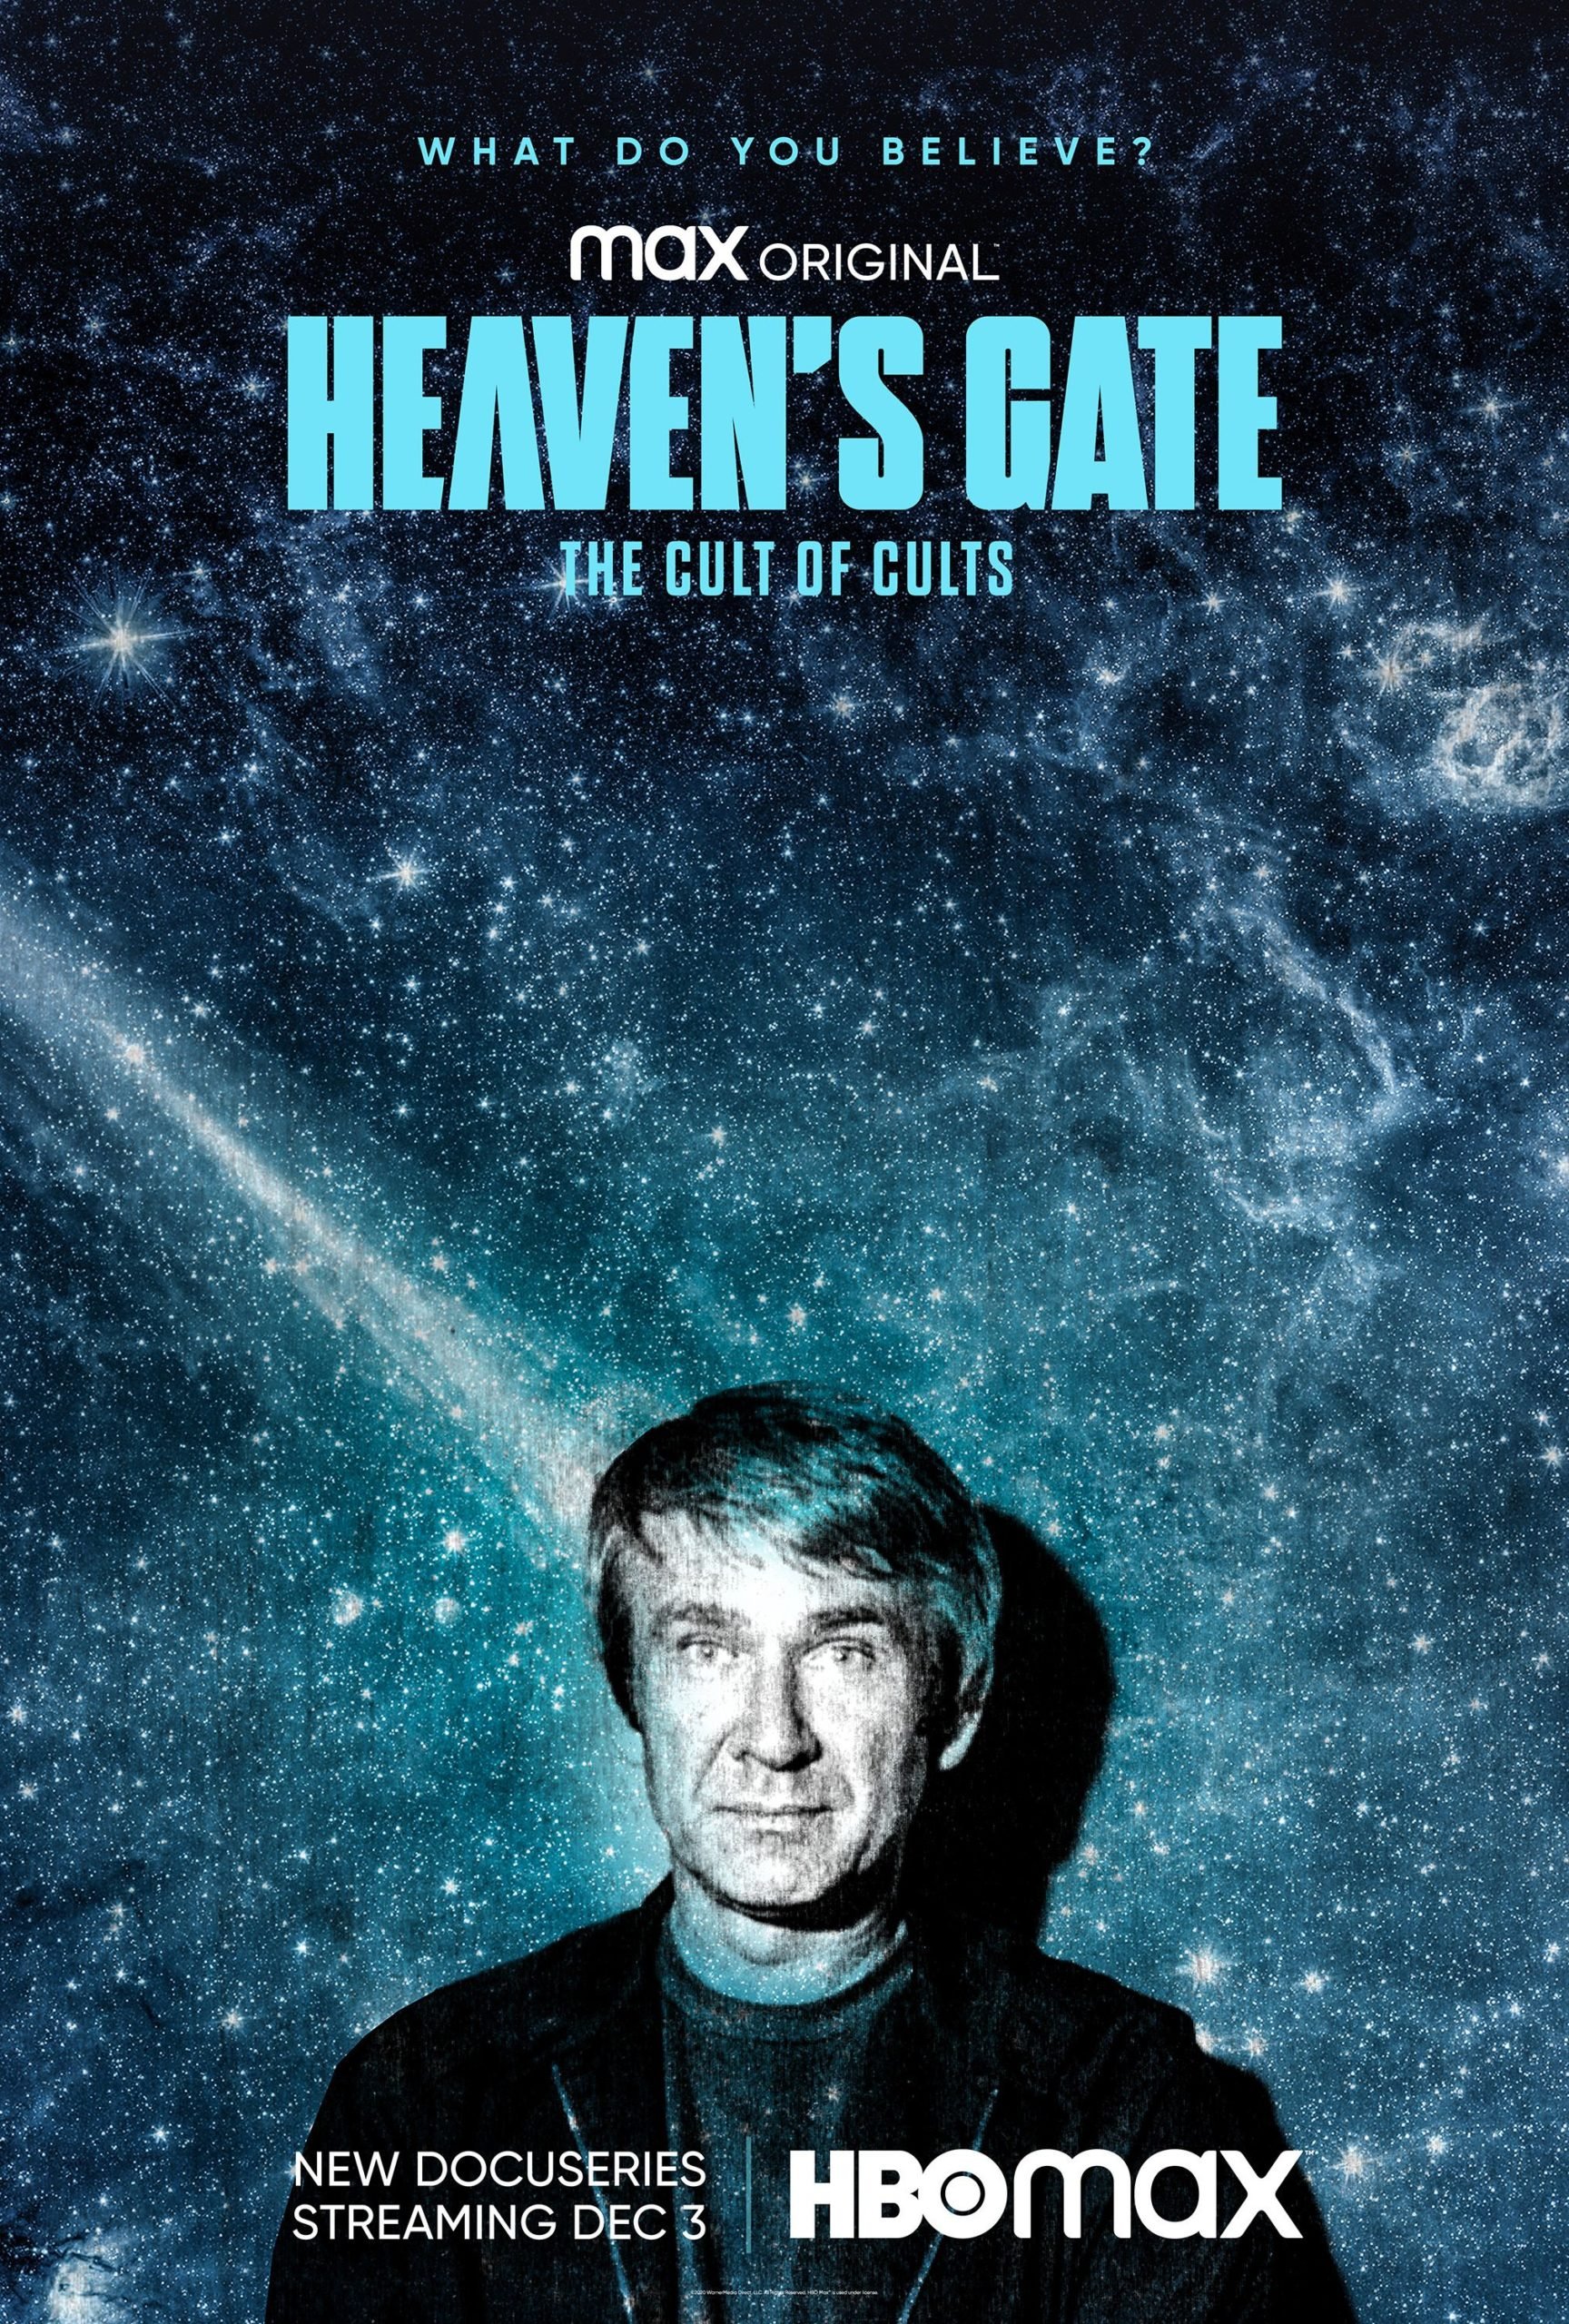 Heaven’s Gate: The Cult of Cults Docuseries Review: TV Completionist #010